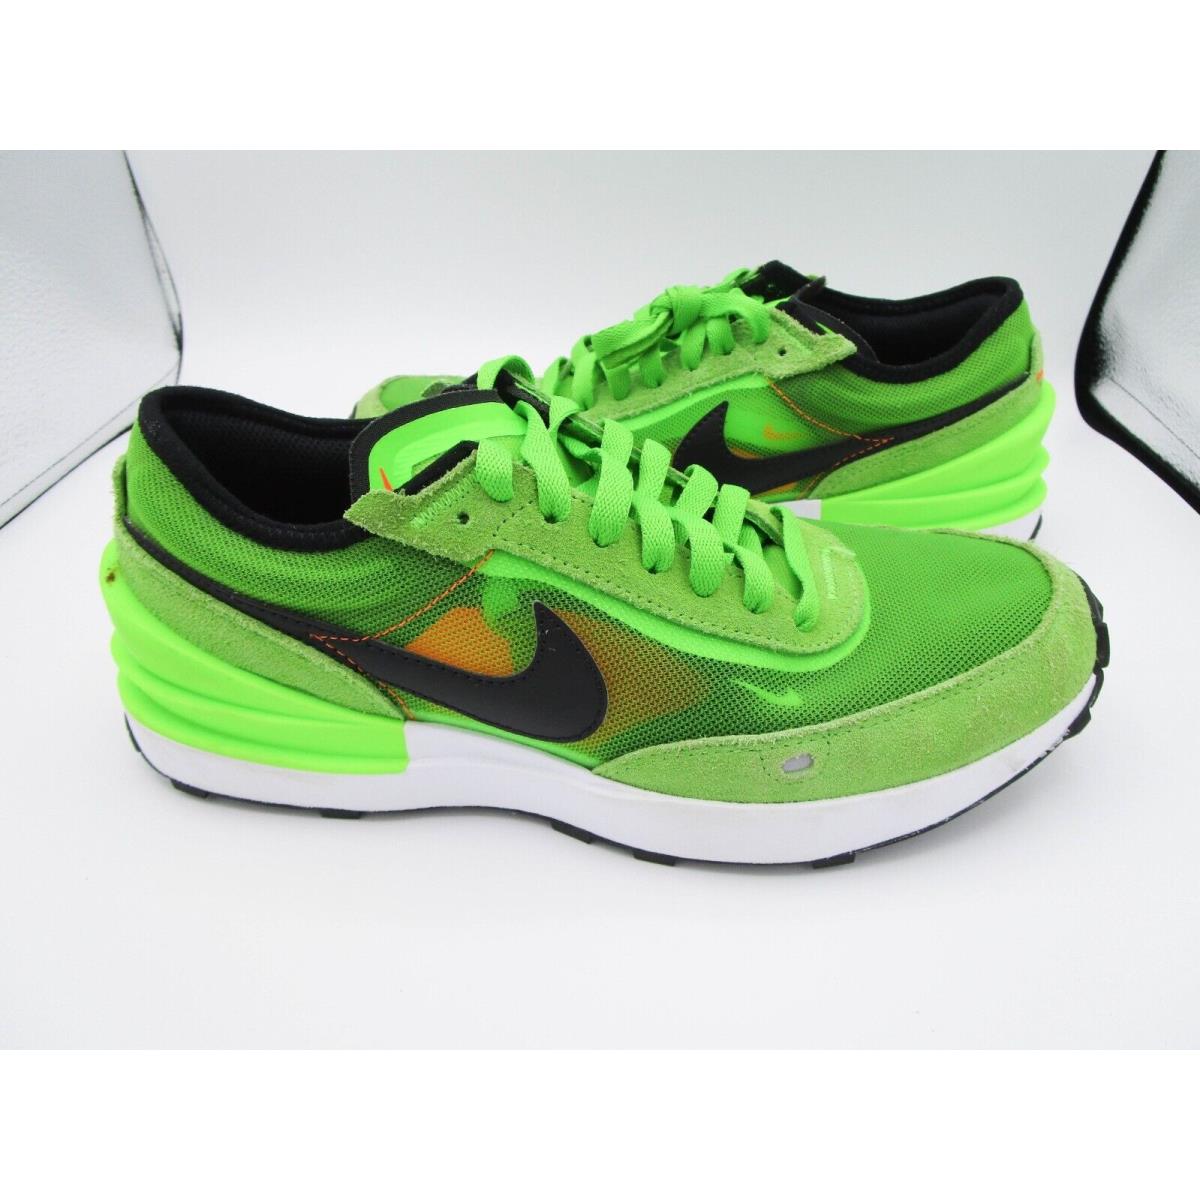 Nike Waffle One Electric Green Shoes/sneakers DC0481-300- Kids 7Y Running